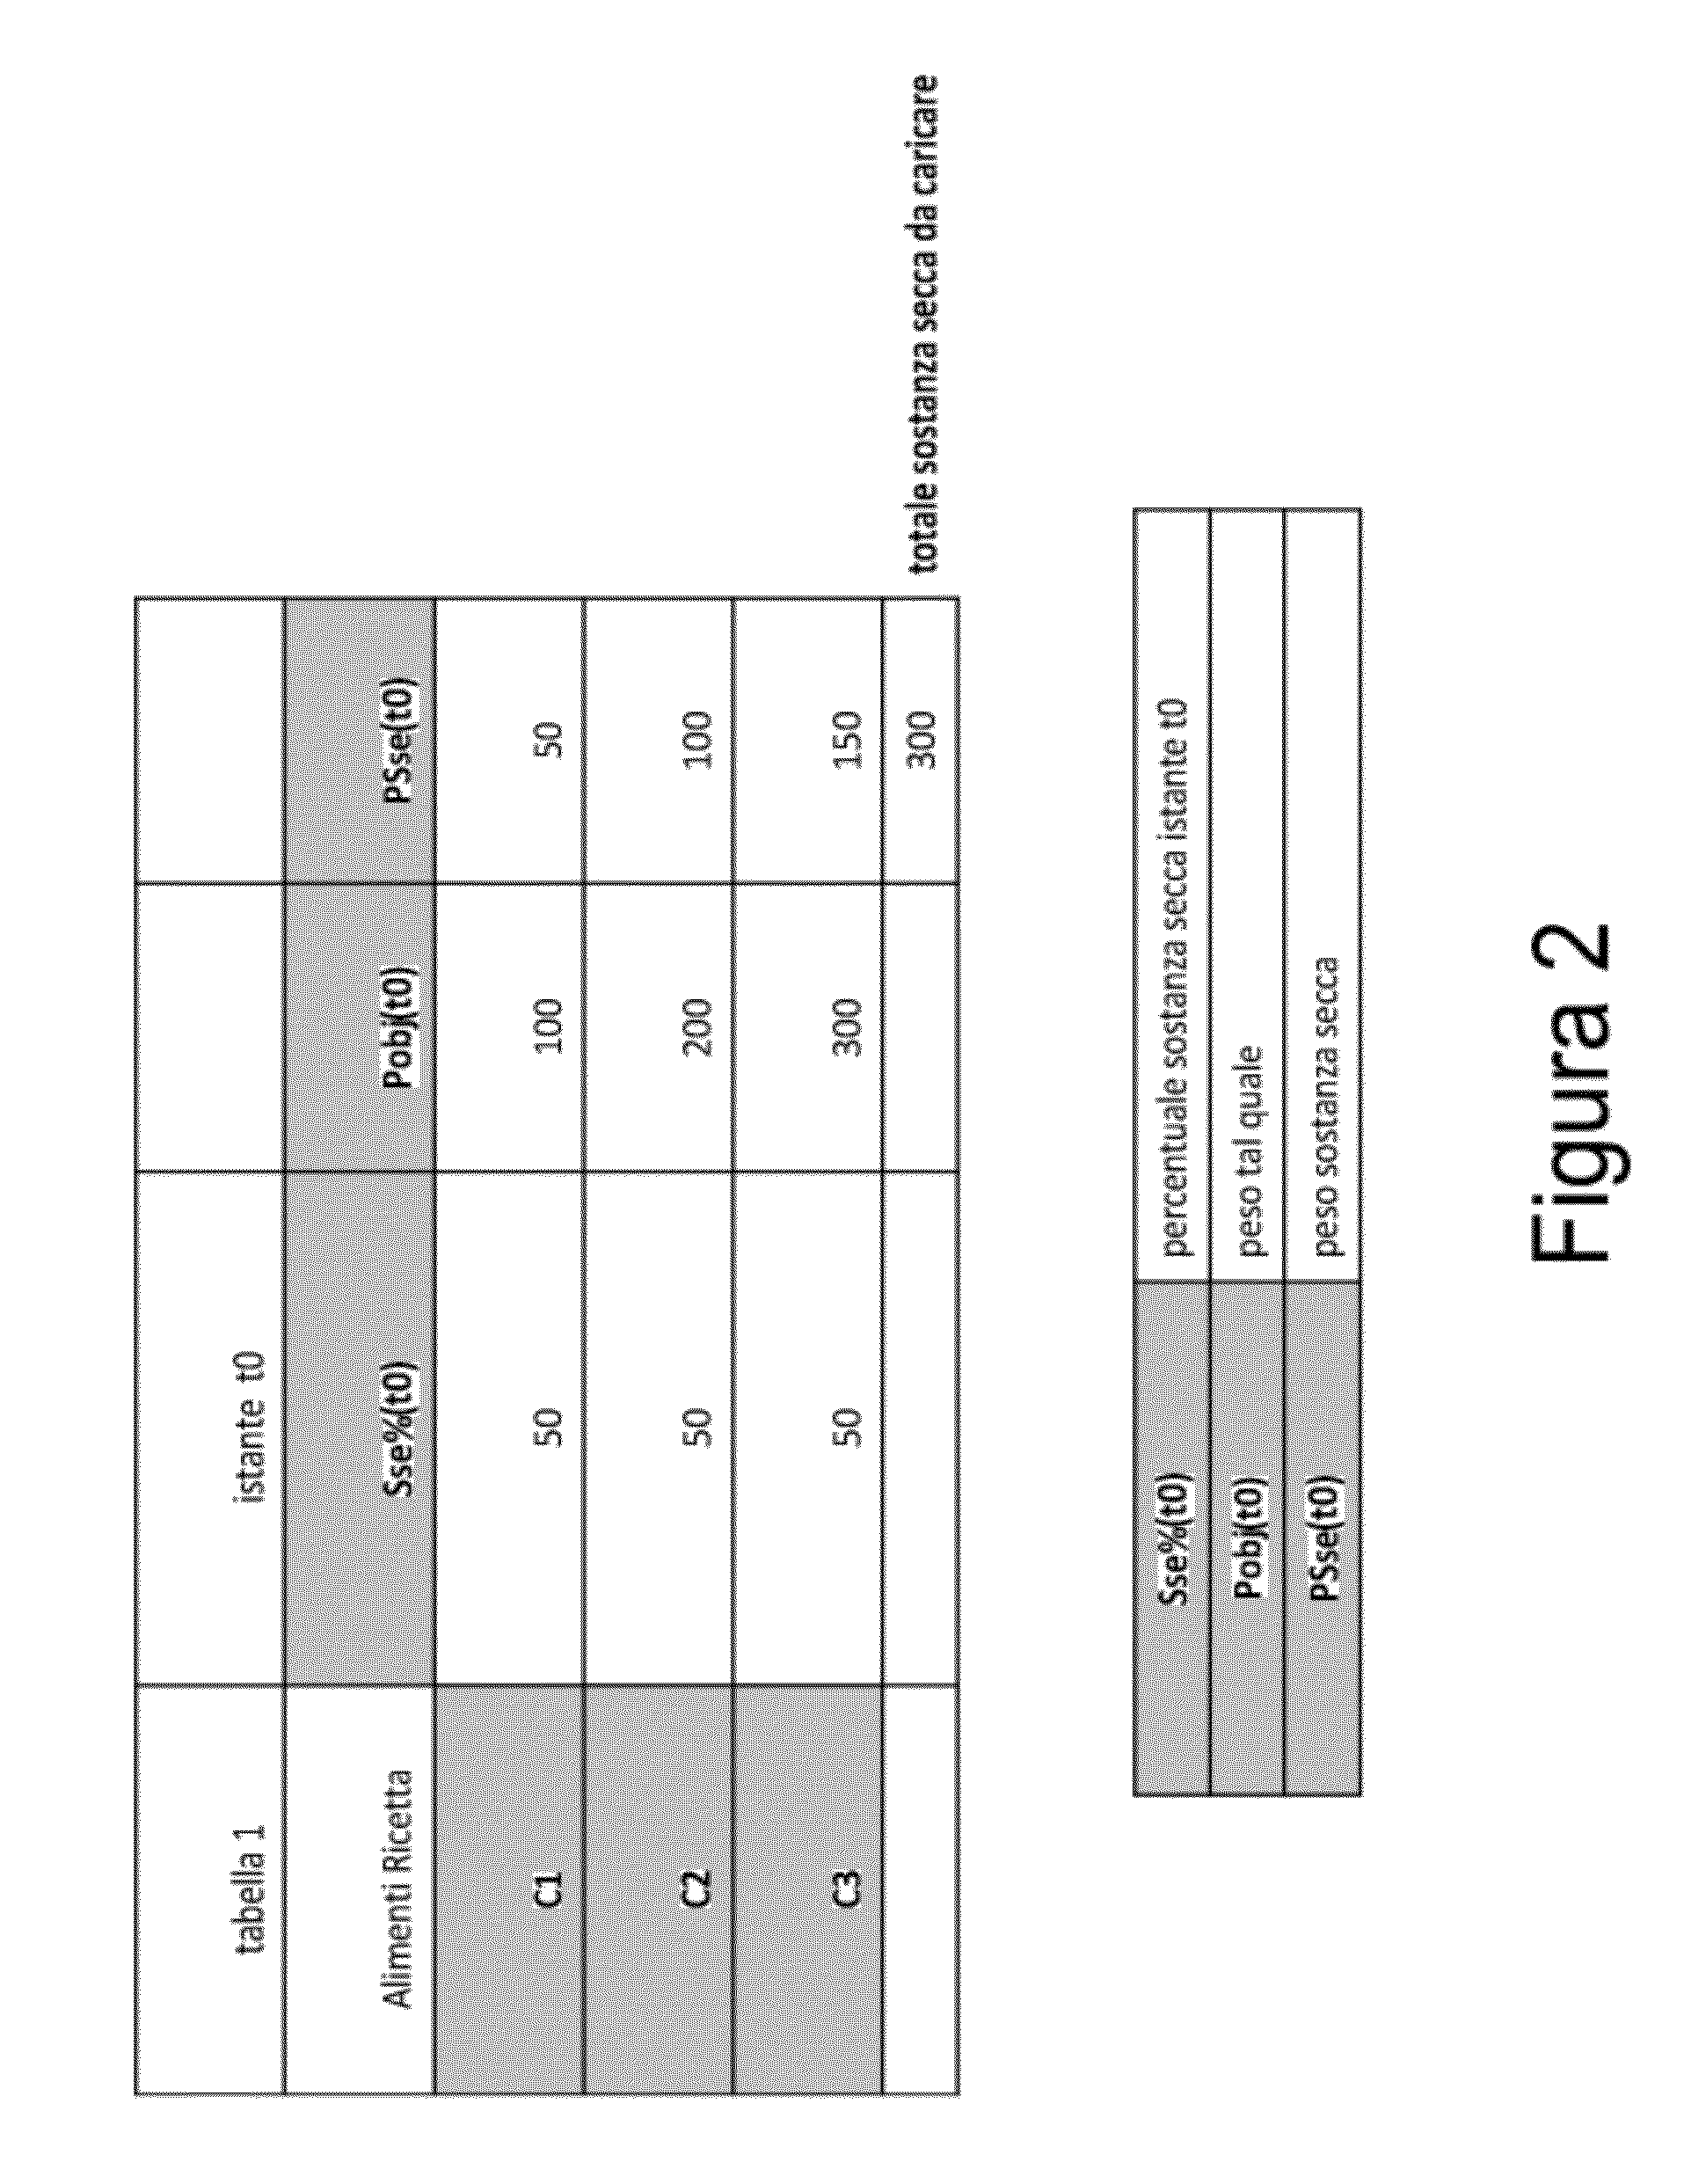 System and method for automatically adjusting the dosage of feed products in a livestock feed recipe